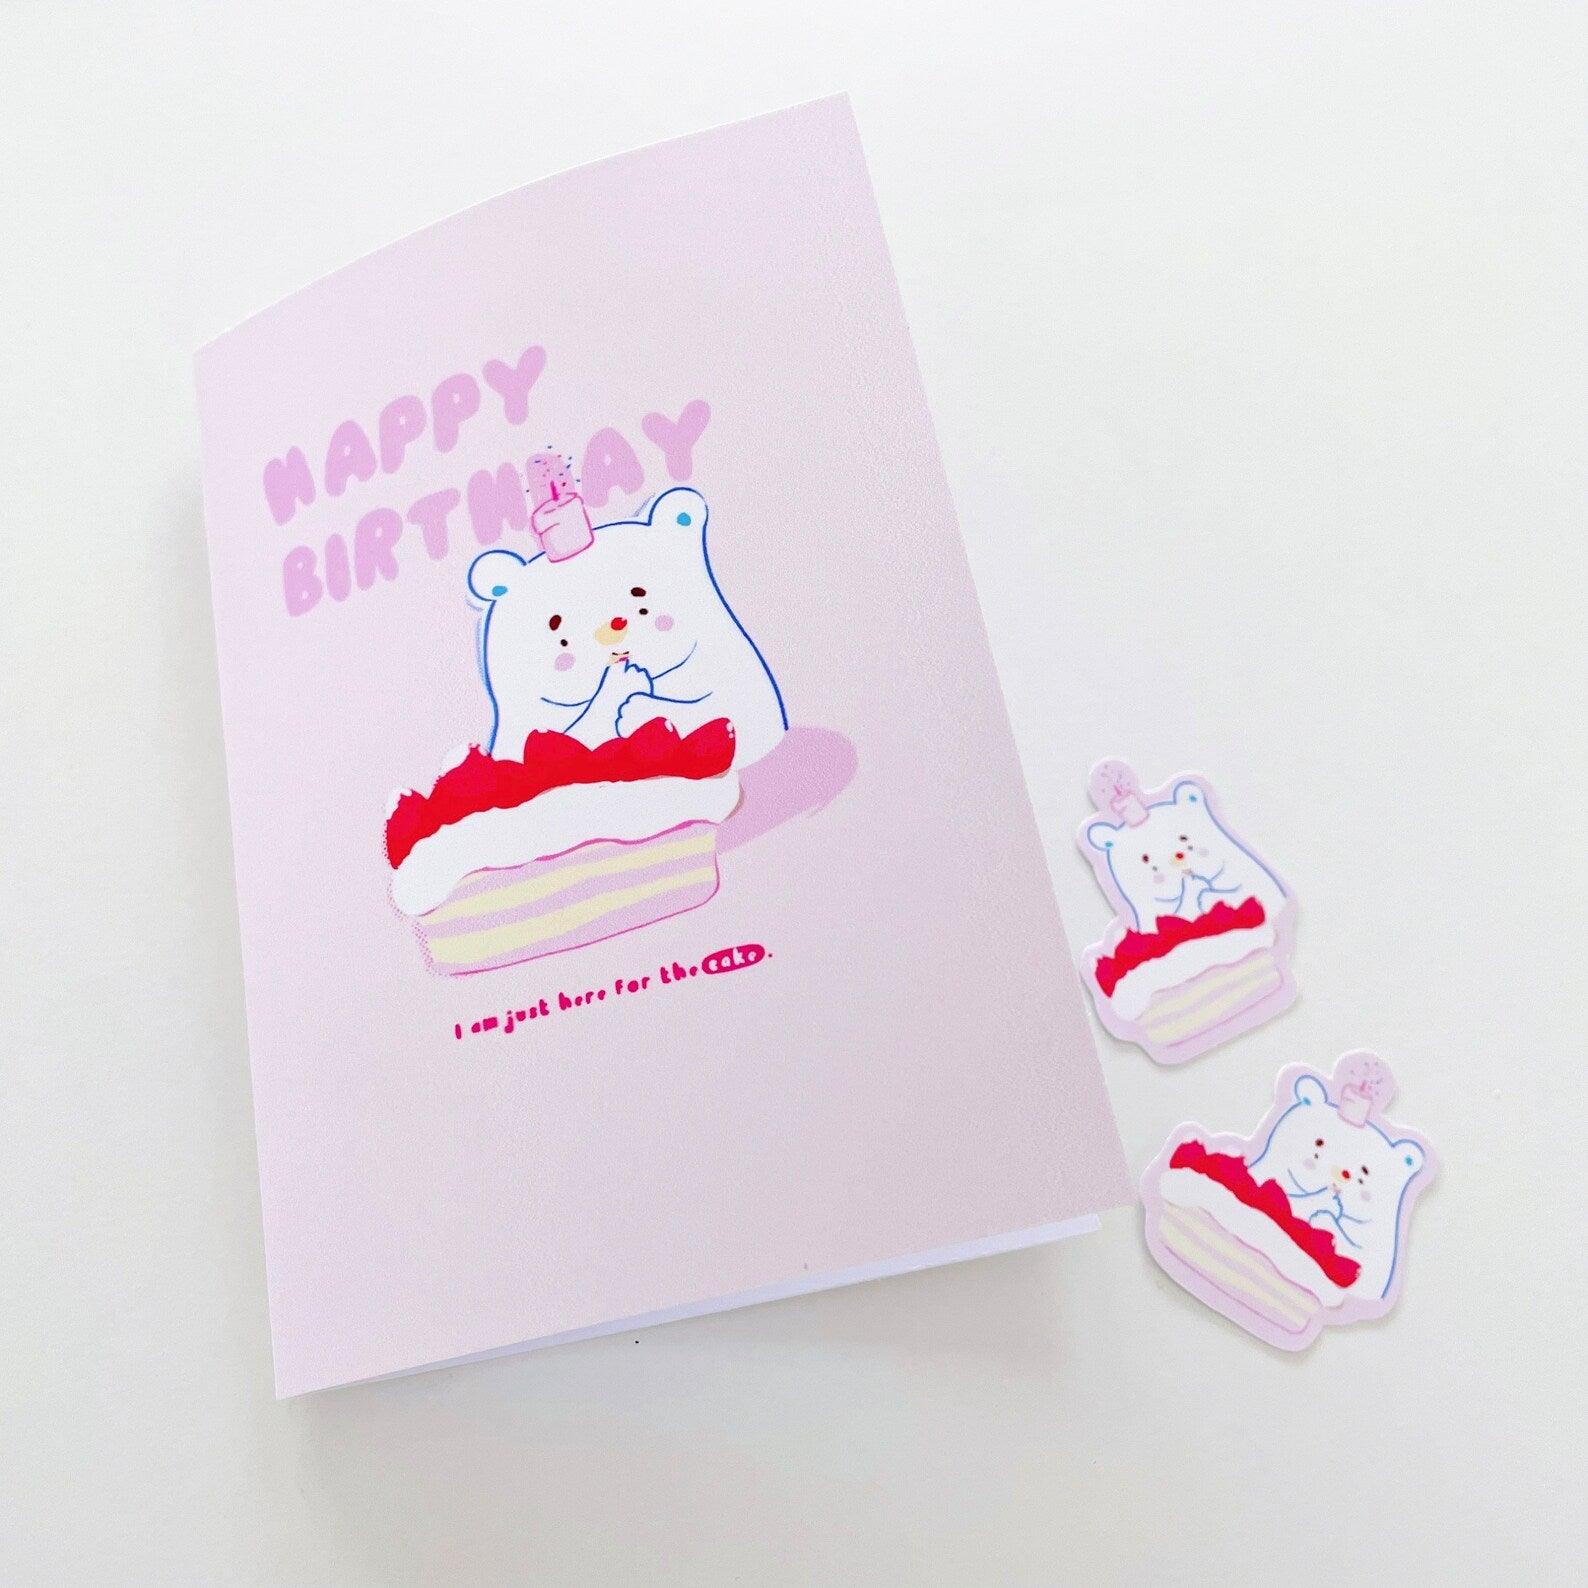 Mochi Bear Cake Card - Cubs Forest